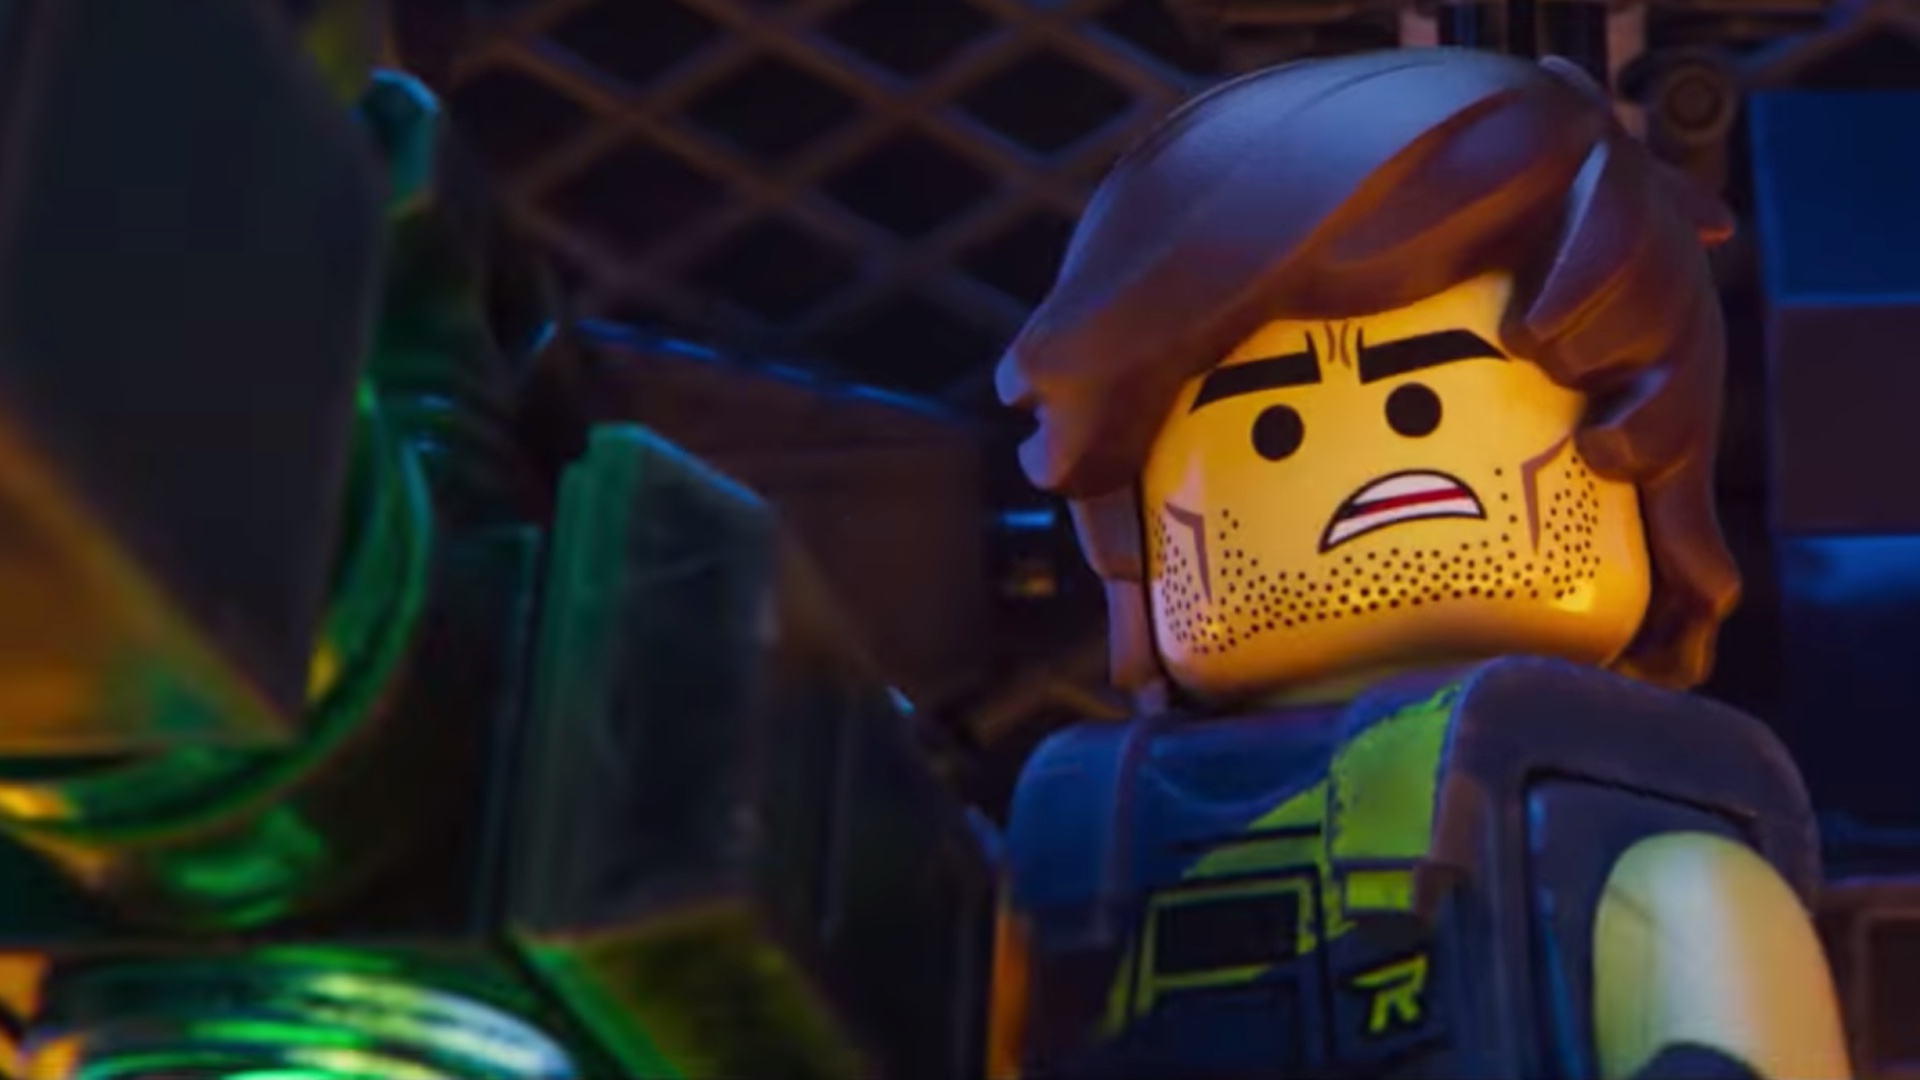 The New Trailer For The Lego Movie 2 The Second Part Takes Us On An